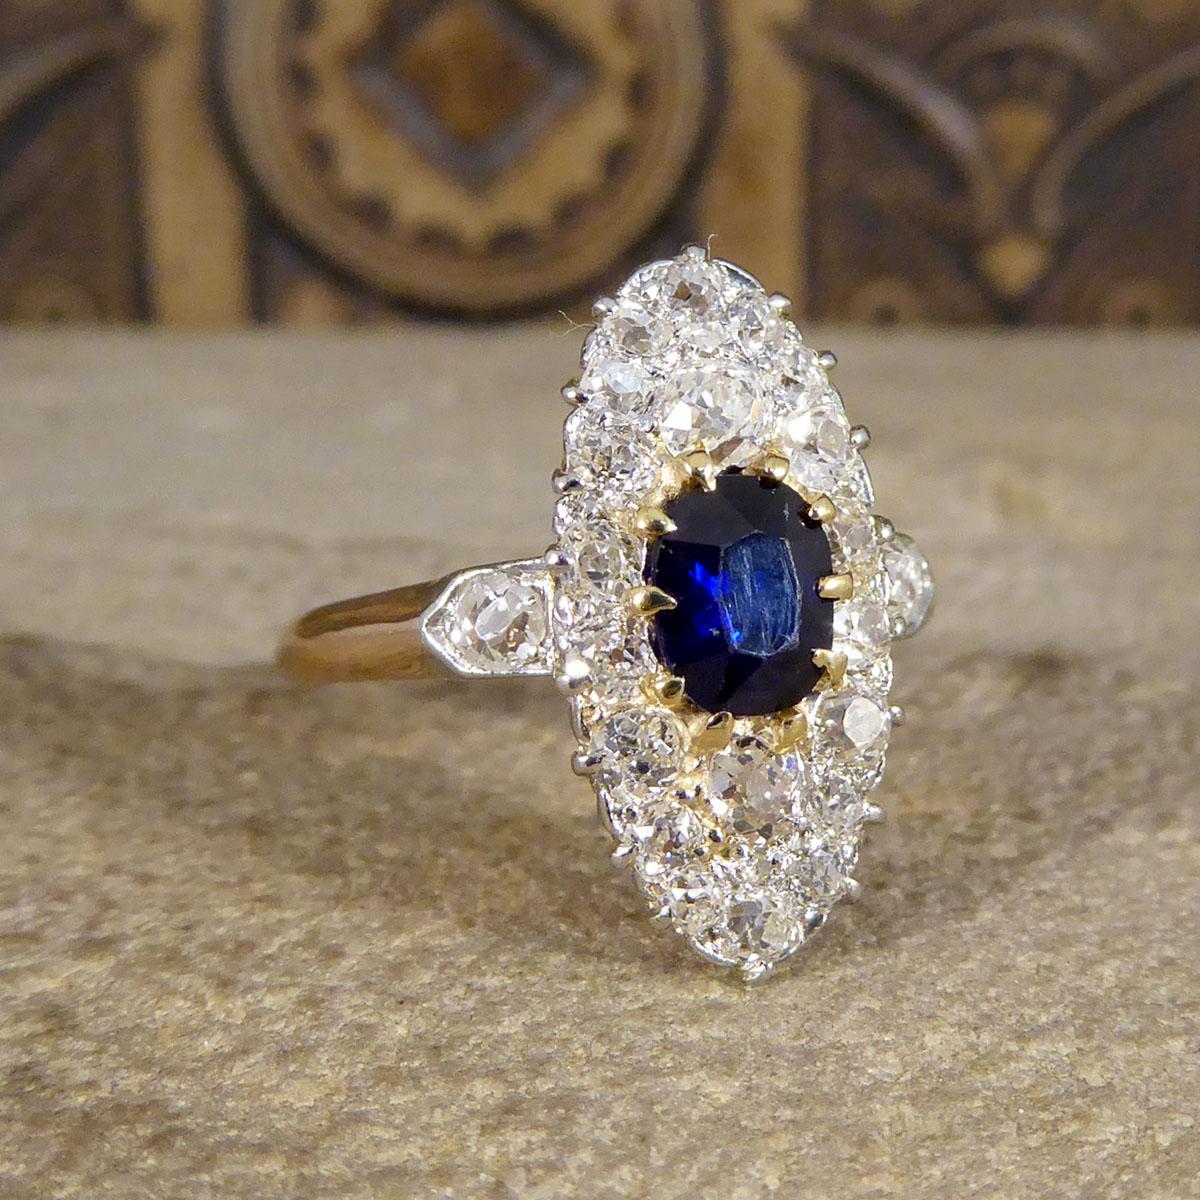 An exquisite antique ring that has been hand crafted in the Late Victorian era. In the centre of this ring sits a 0.55ct Oval Cut Sapphire in a 18ct Yellow Gold claw setting. Surrounding this Sapphires are 22 Old European Cut Diamonds of different